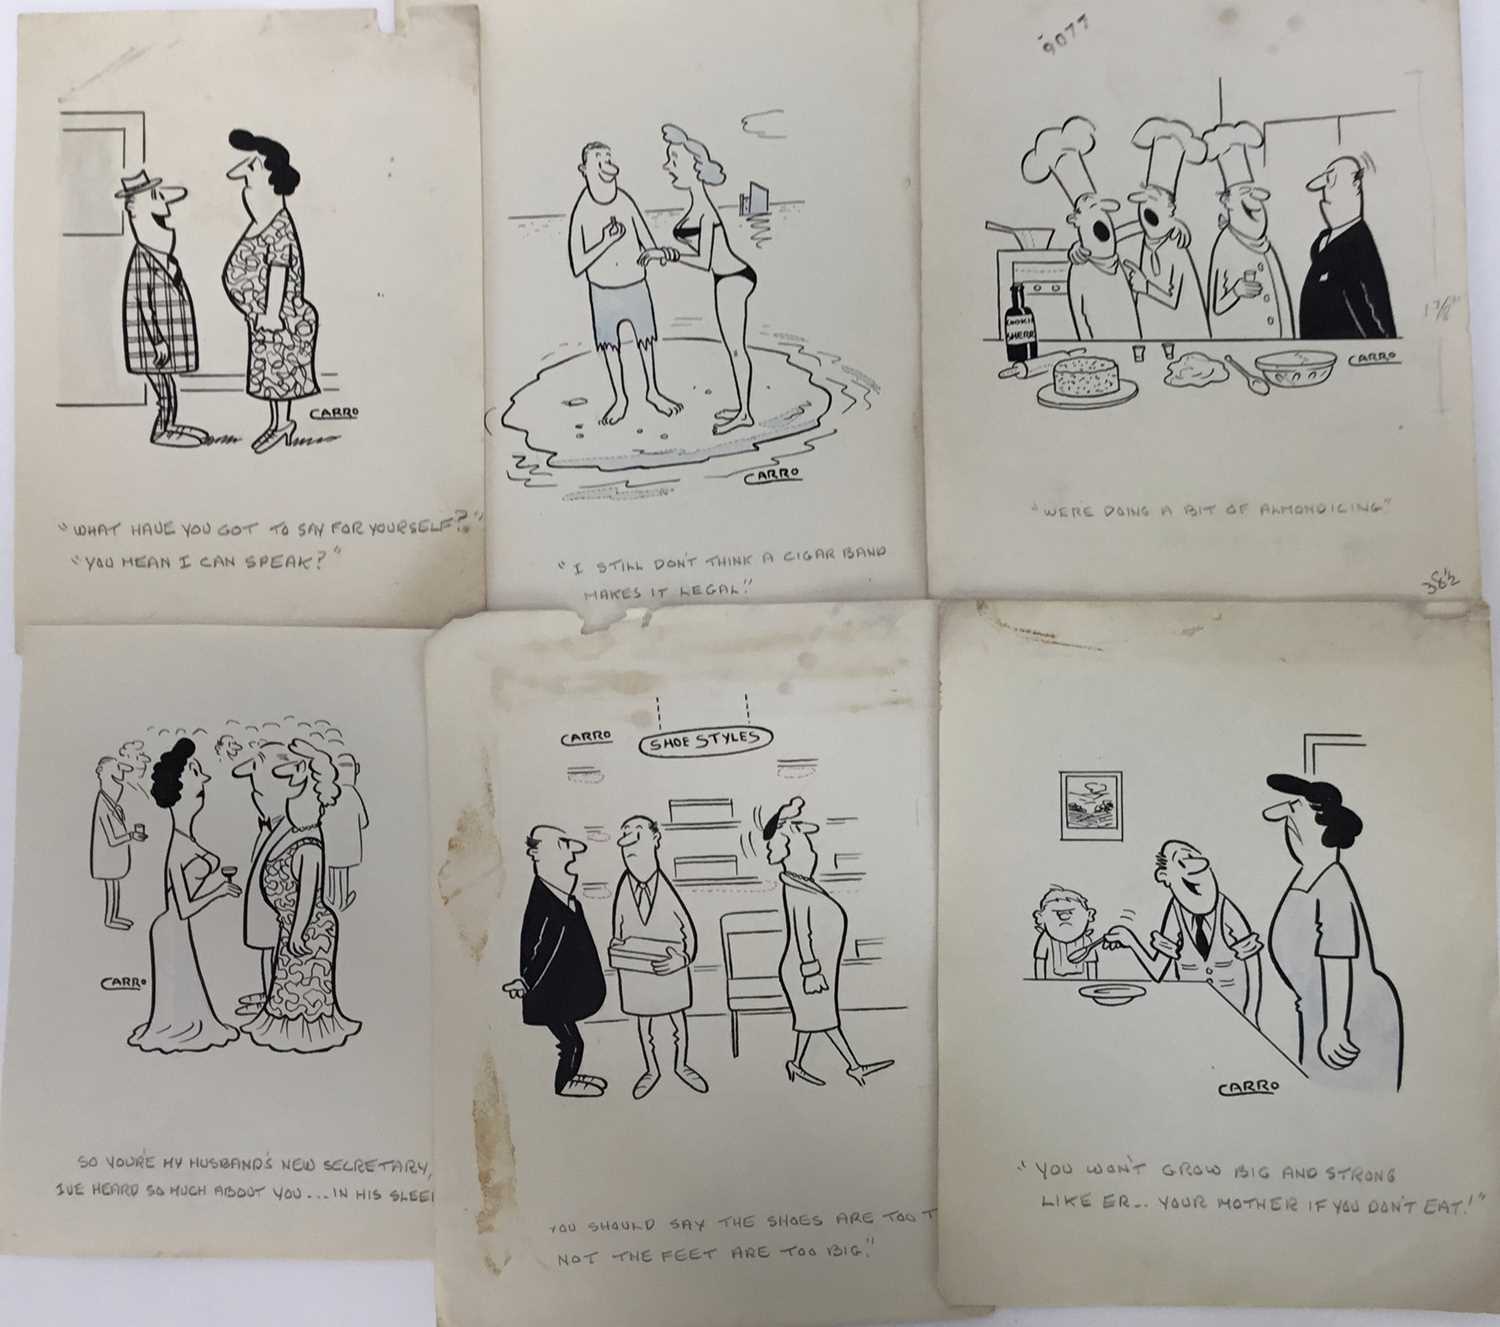 Collection of original pen and ink illustrations by Carro (possibly for a Chelmsford newspaper)